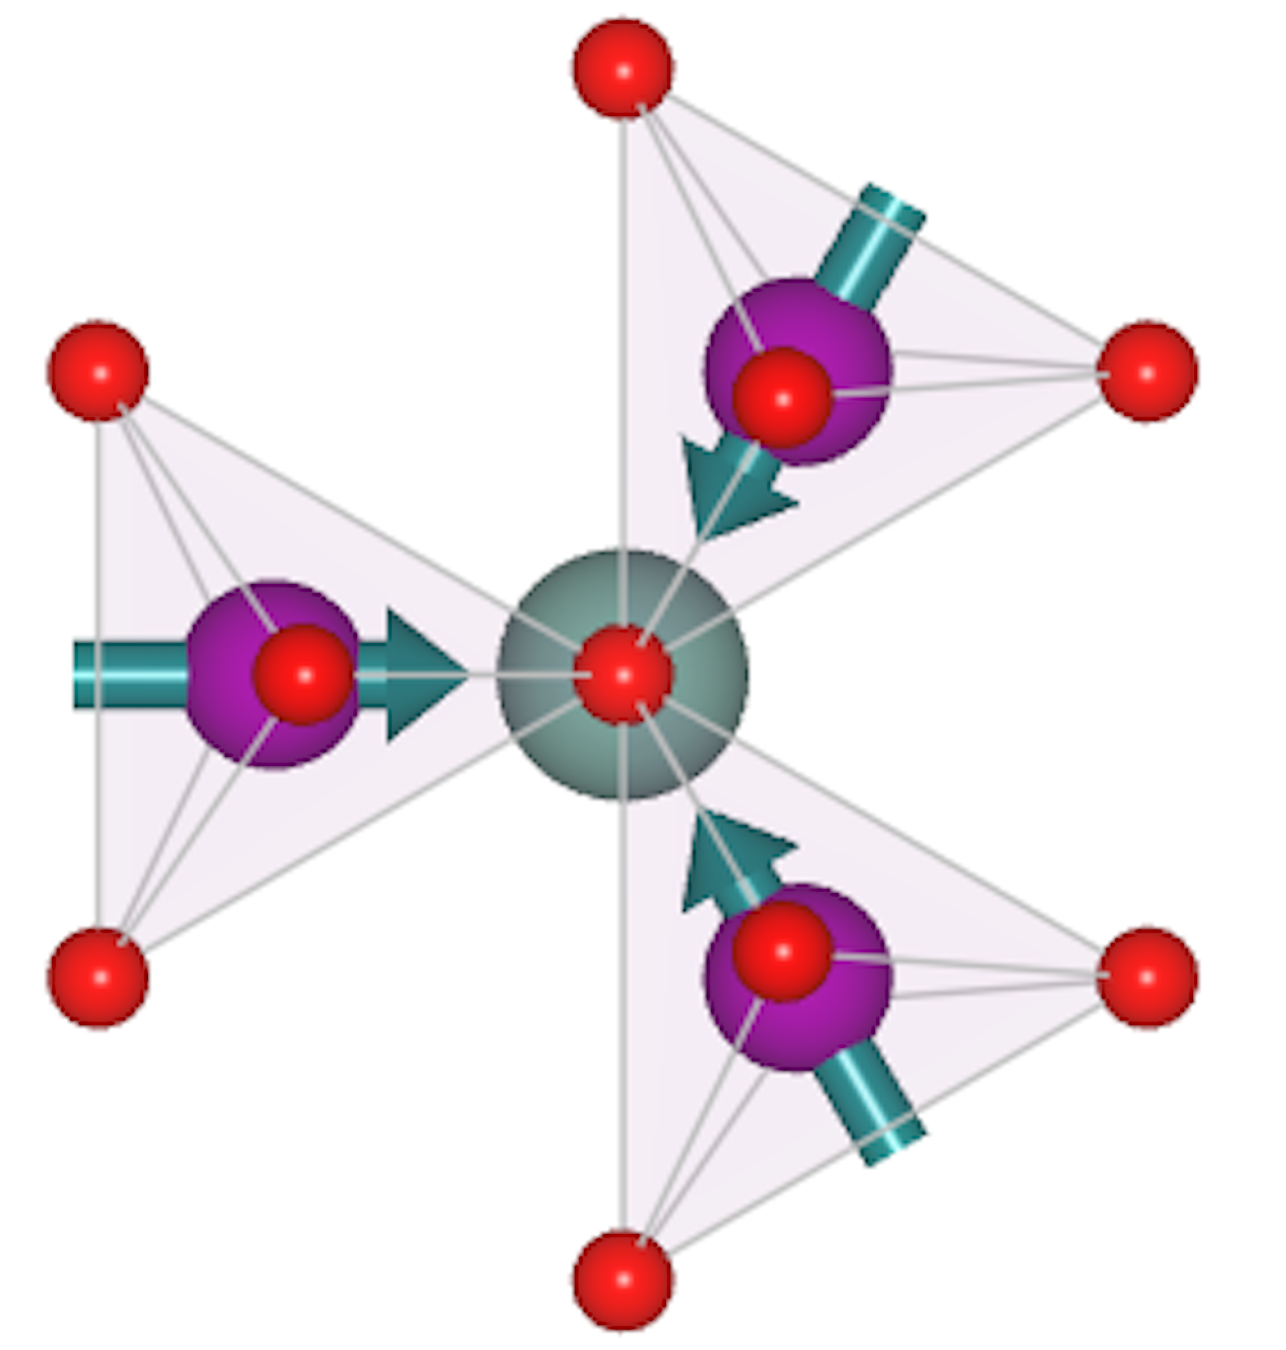 The magnetic order that minimises the energy of a trimer of MnO5 bipyramids in hexagonal YMnO3